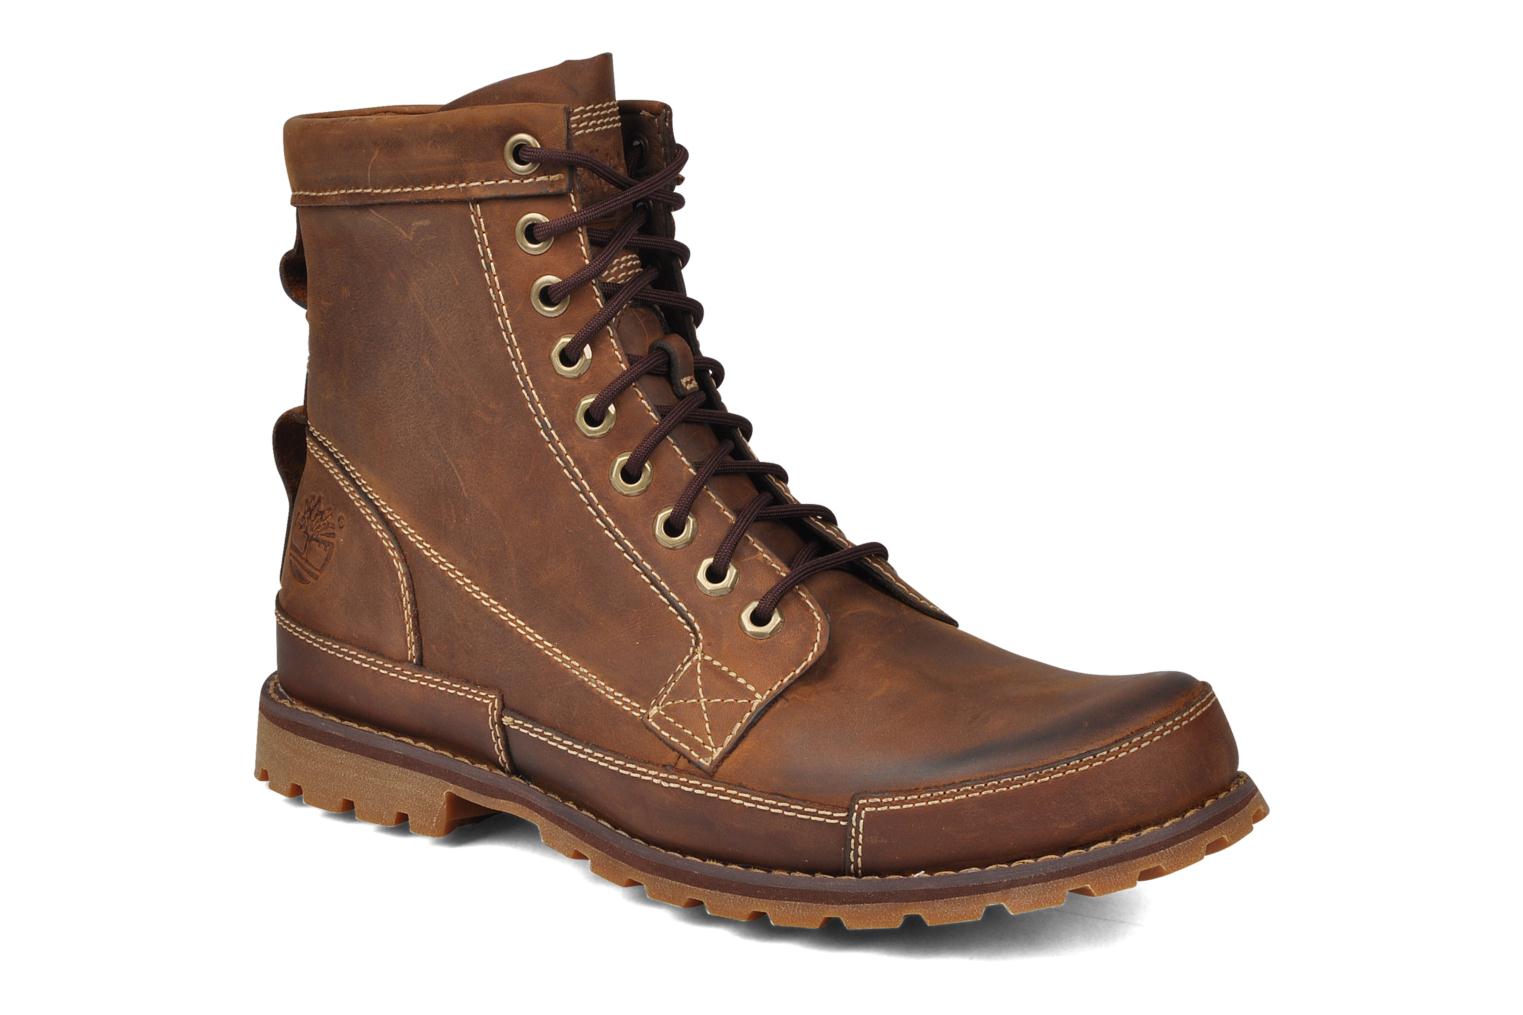 Timberland Earthkeepers Burn Ankle boots in Brown at Sarenza.co.uk (45114)